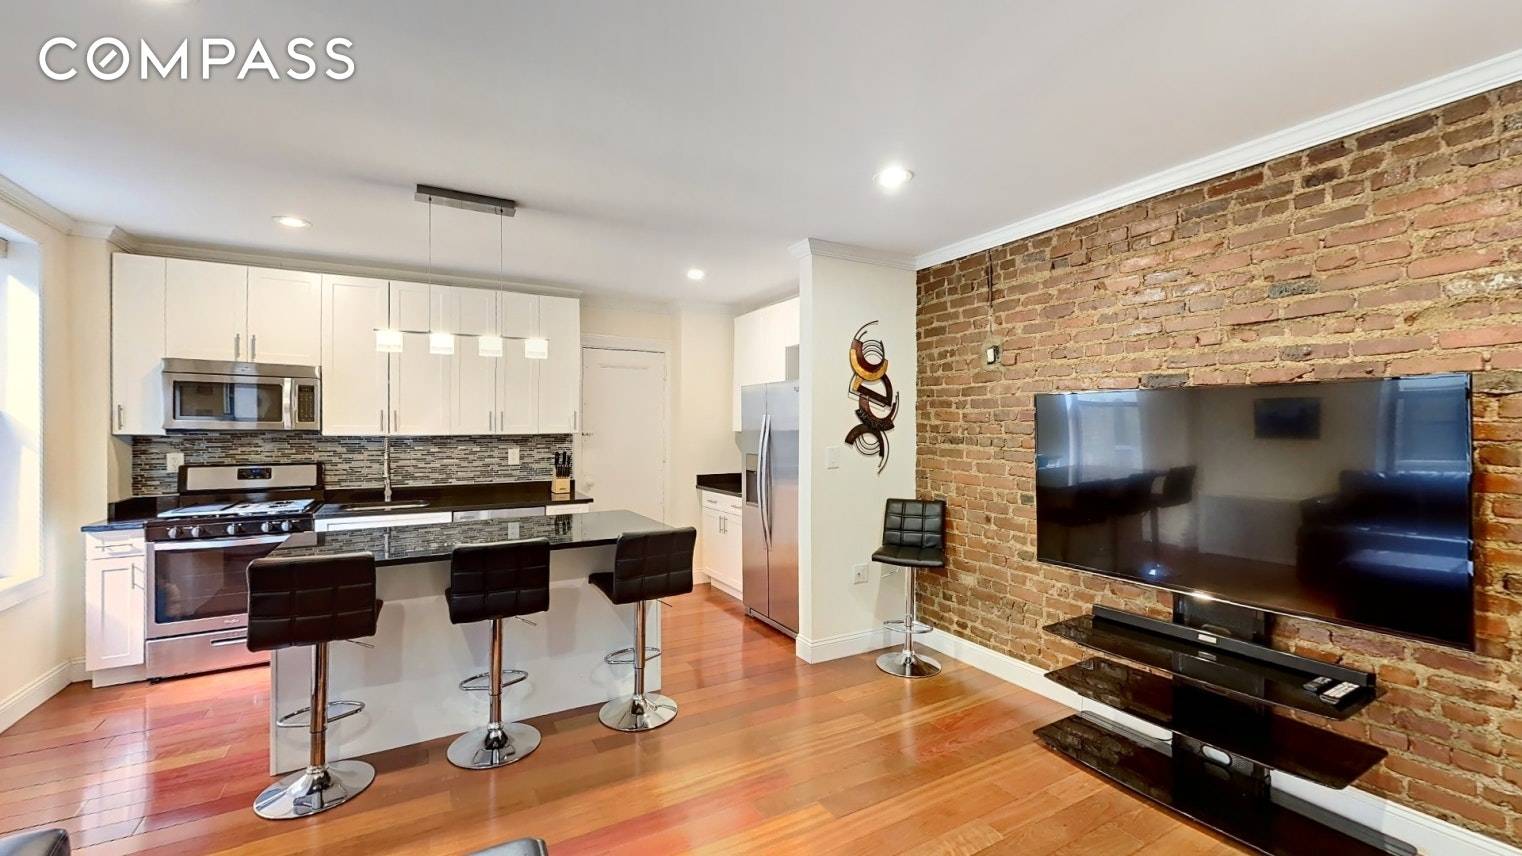 Apt 29 is a renovated spacious one bedroom co op apt, overlooking tree lined courtyard.